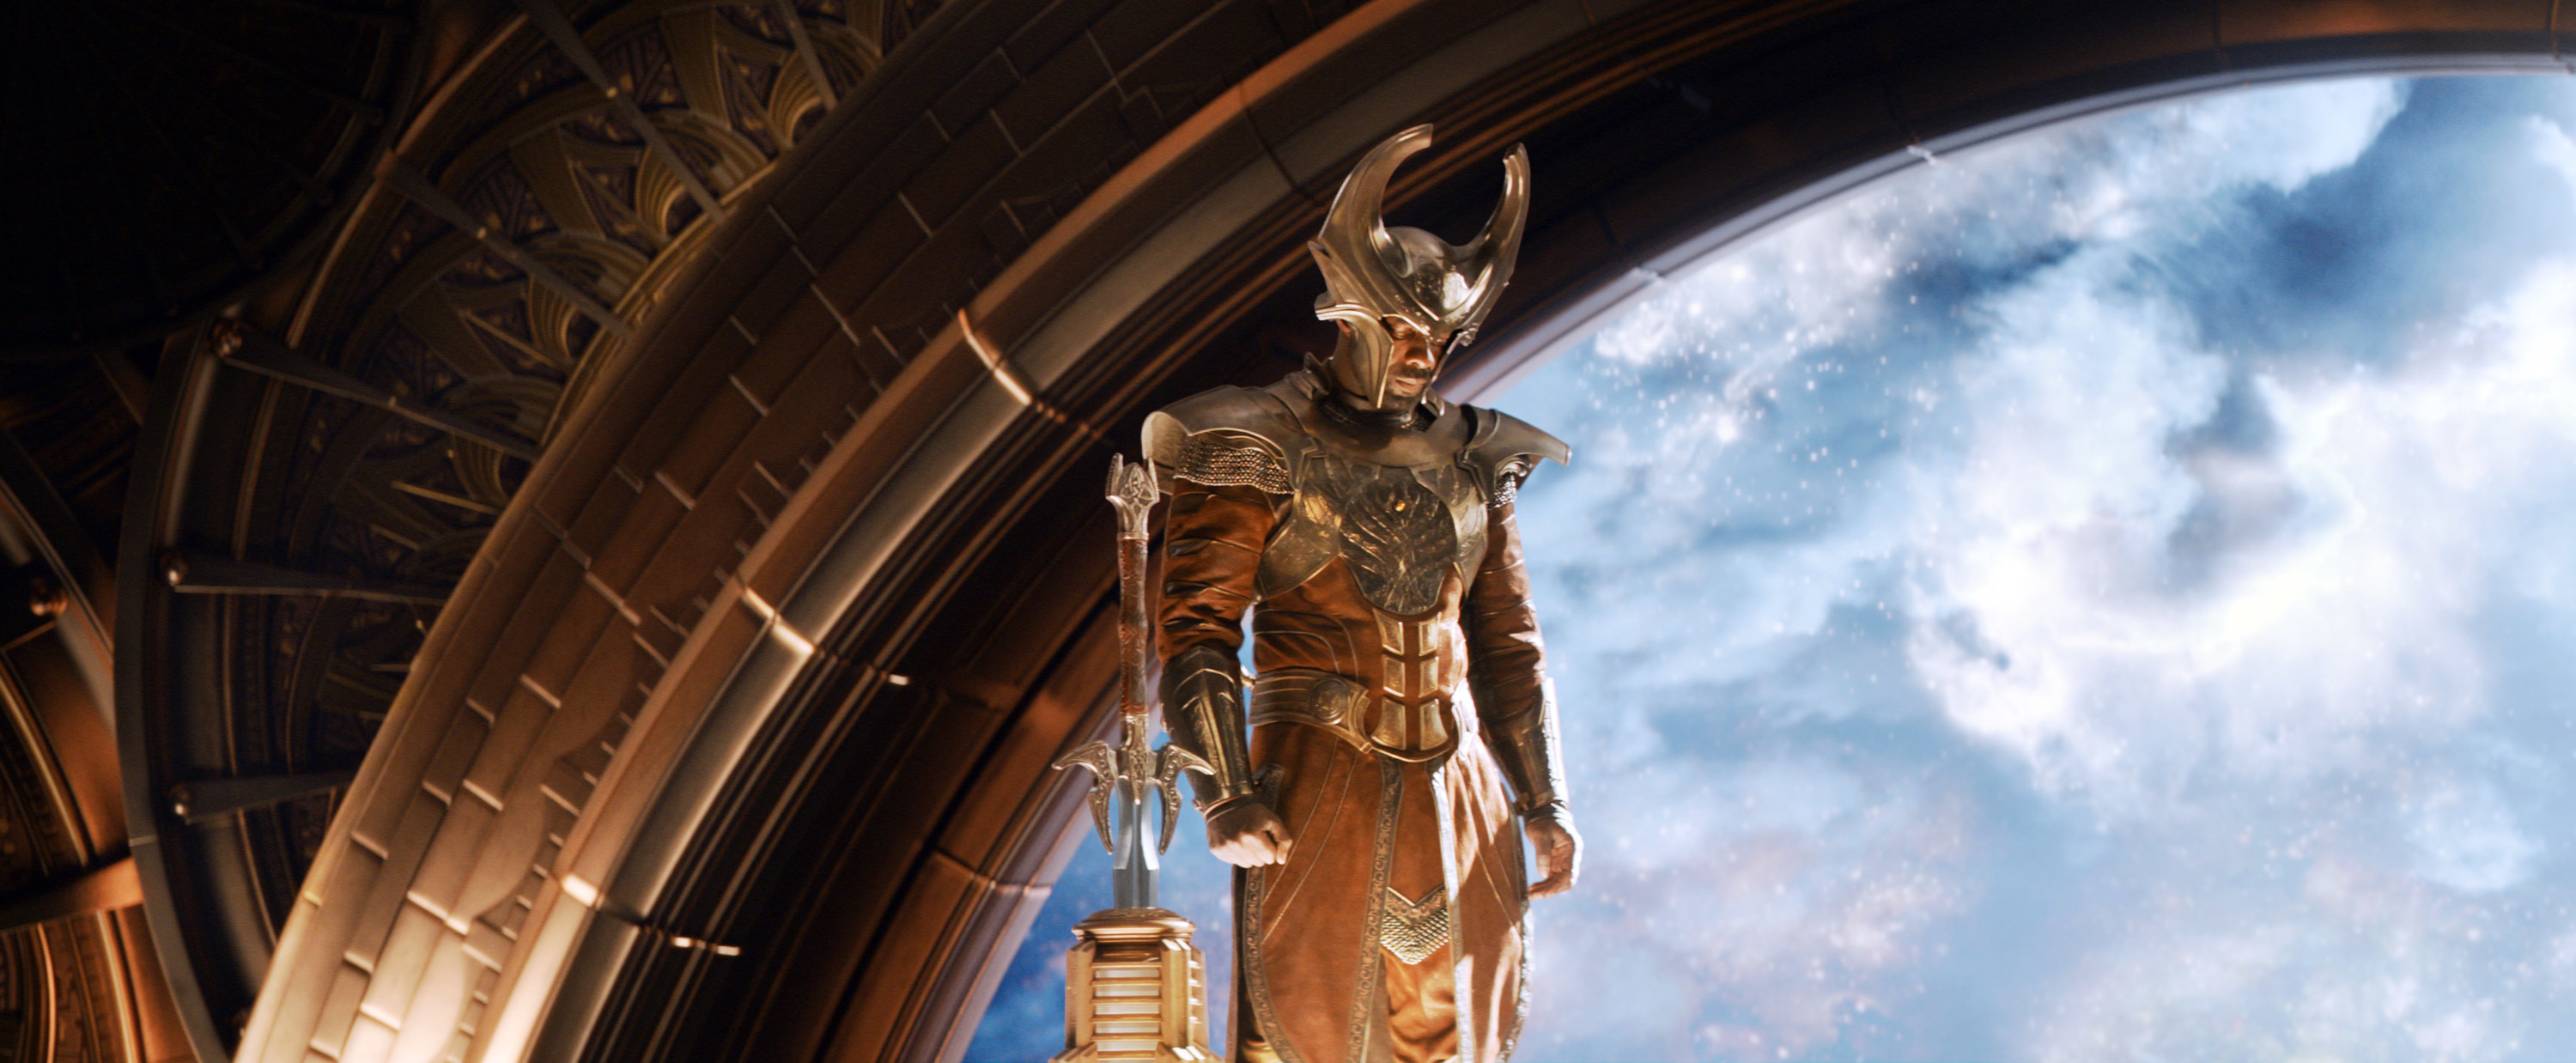 Heimdall opens the Bifrost